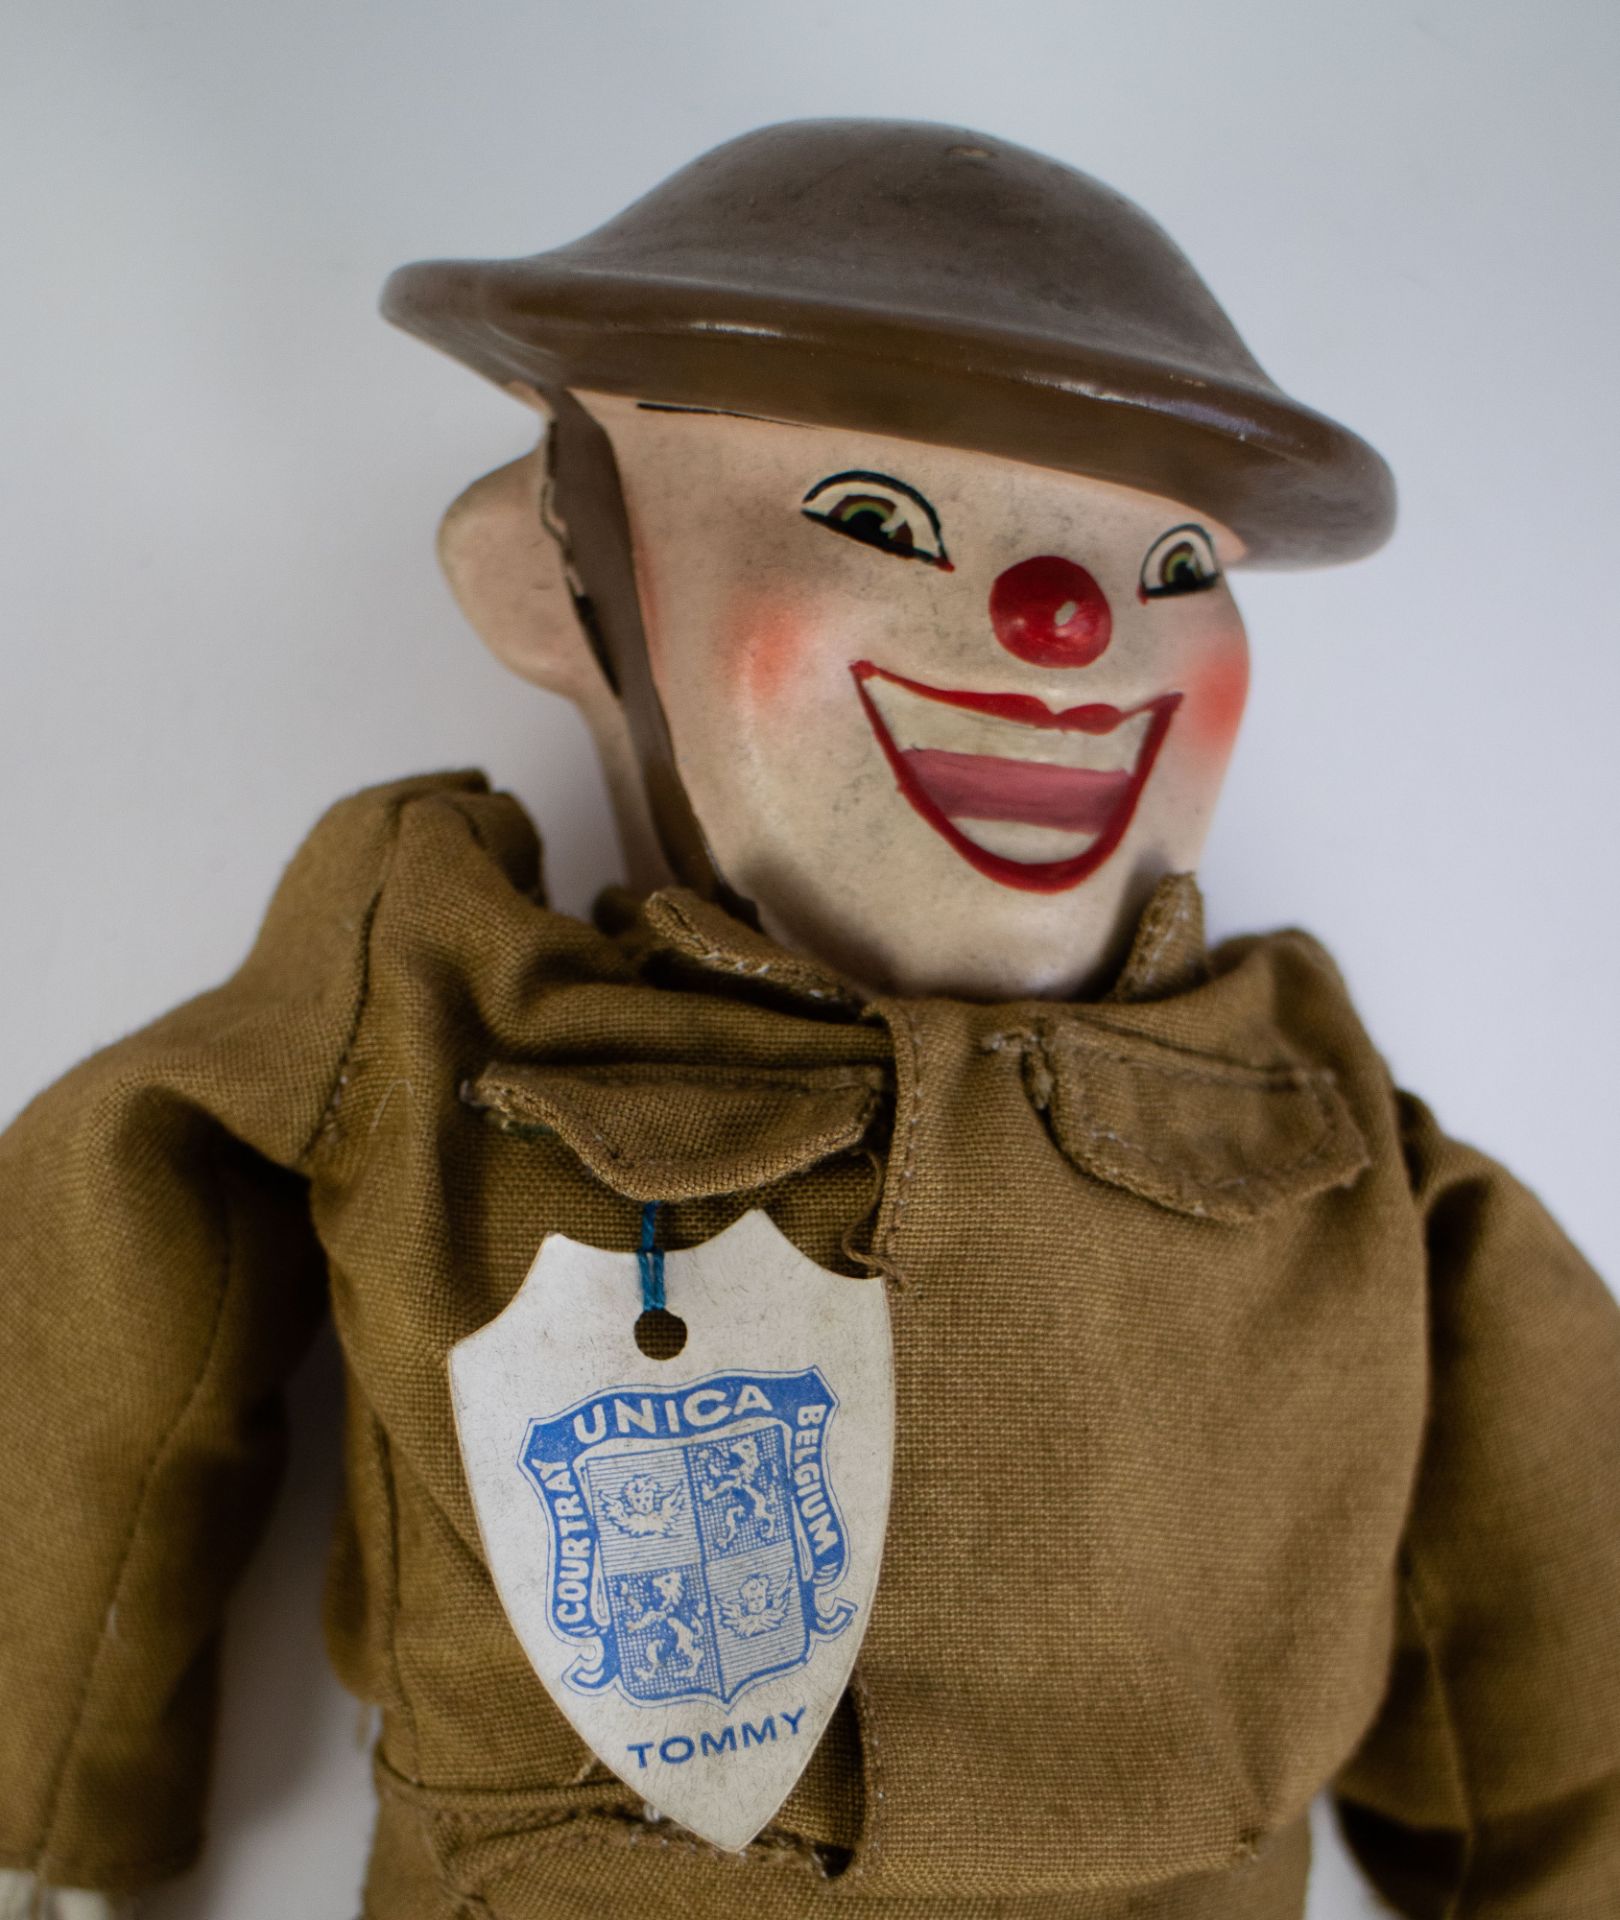 Doll Tommy UNICA Belgium - Image 2 of 3